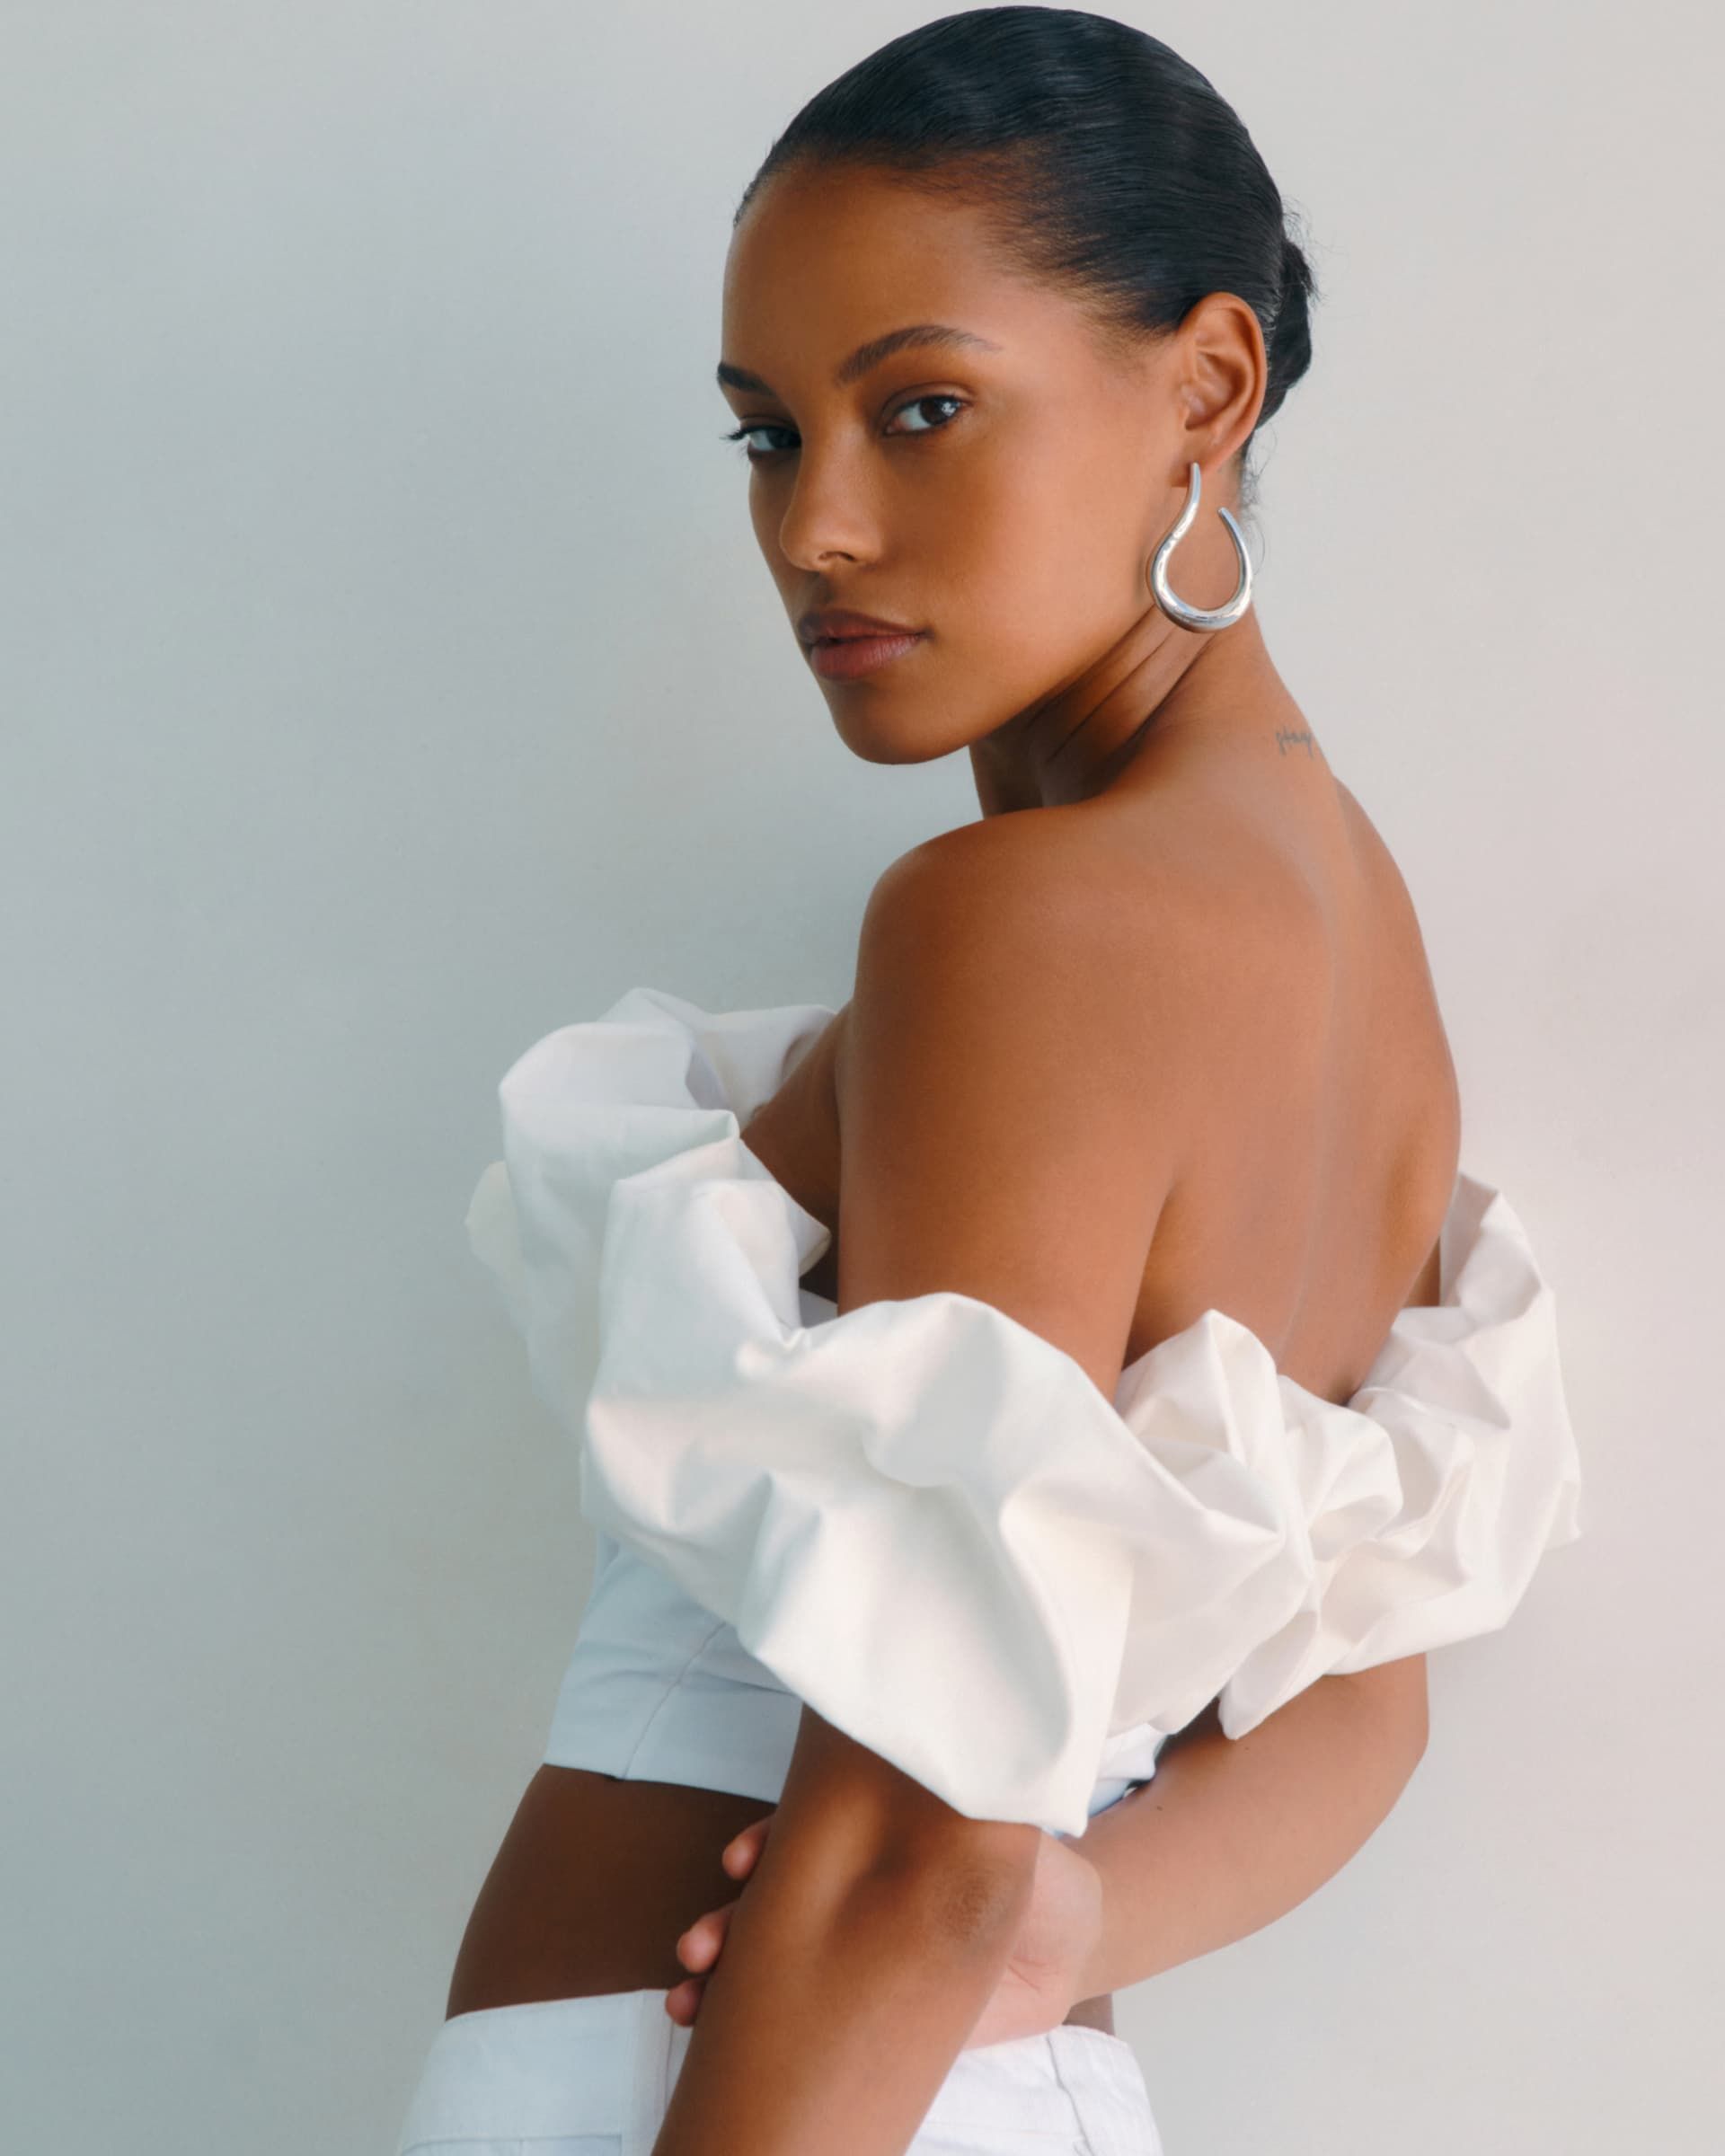 A model wears a white off-the-shoulder ruffled top.